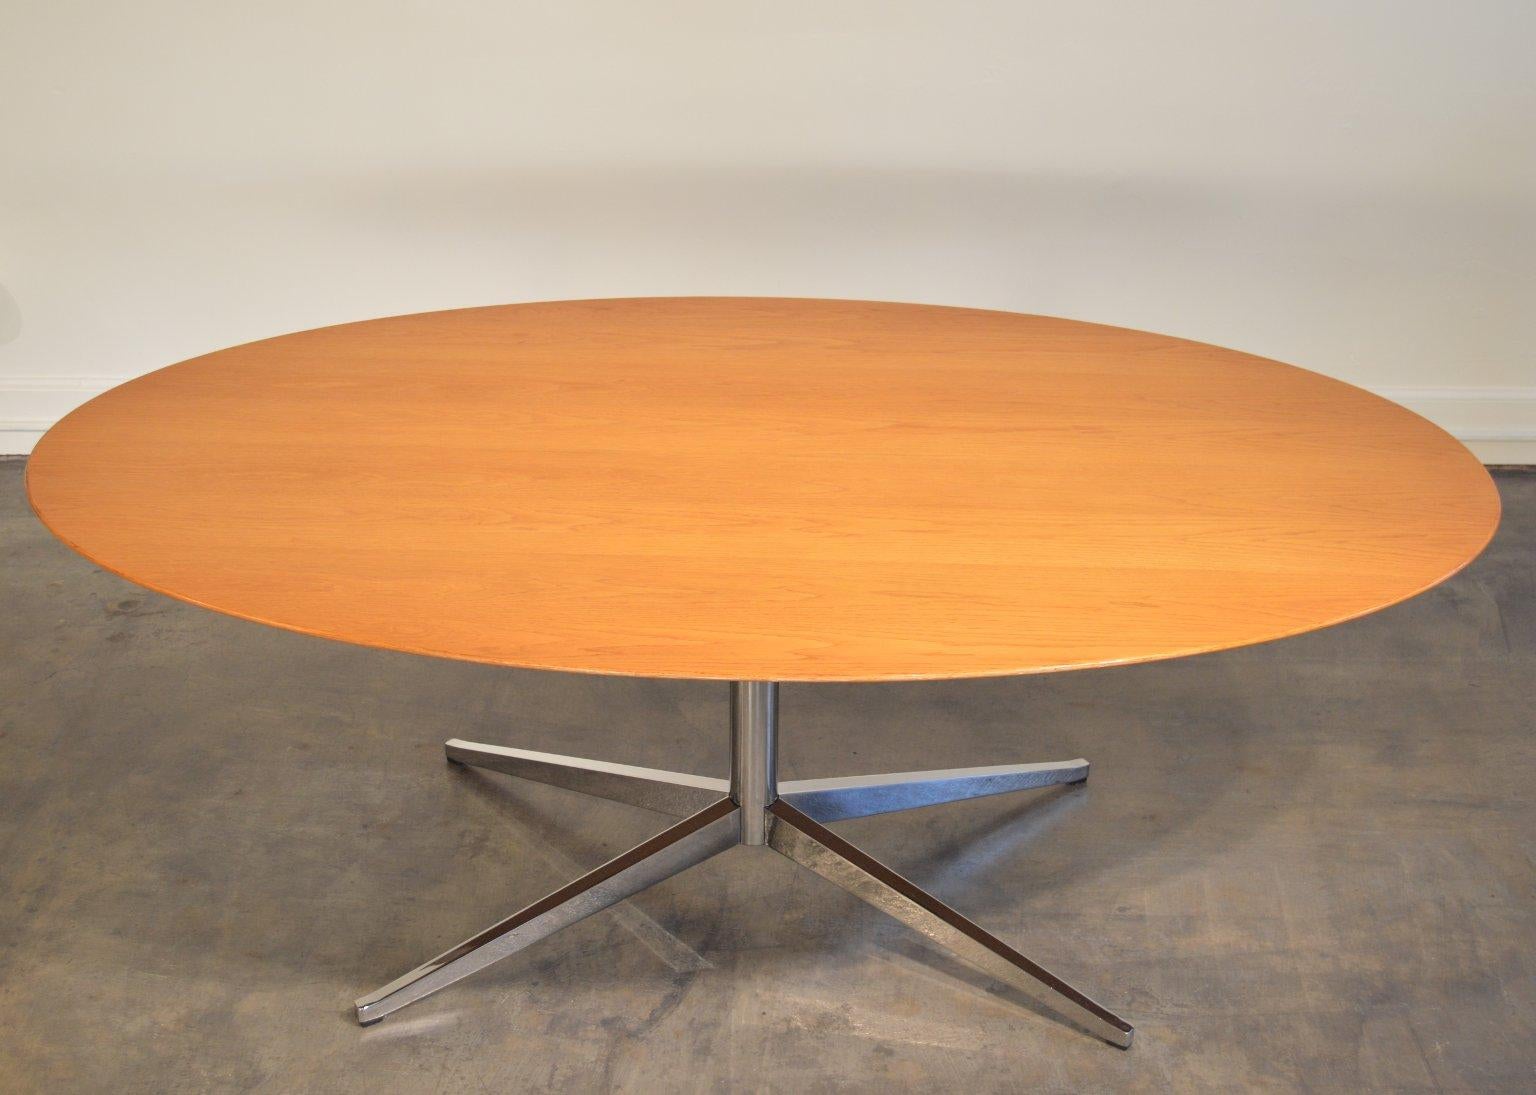 Designed in 1961 to provide a table or conference table suited to conversation, the oval shape eschews the hierarchy of 